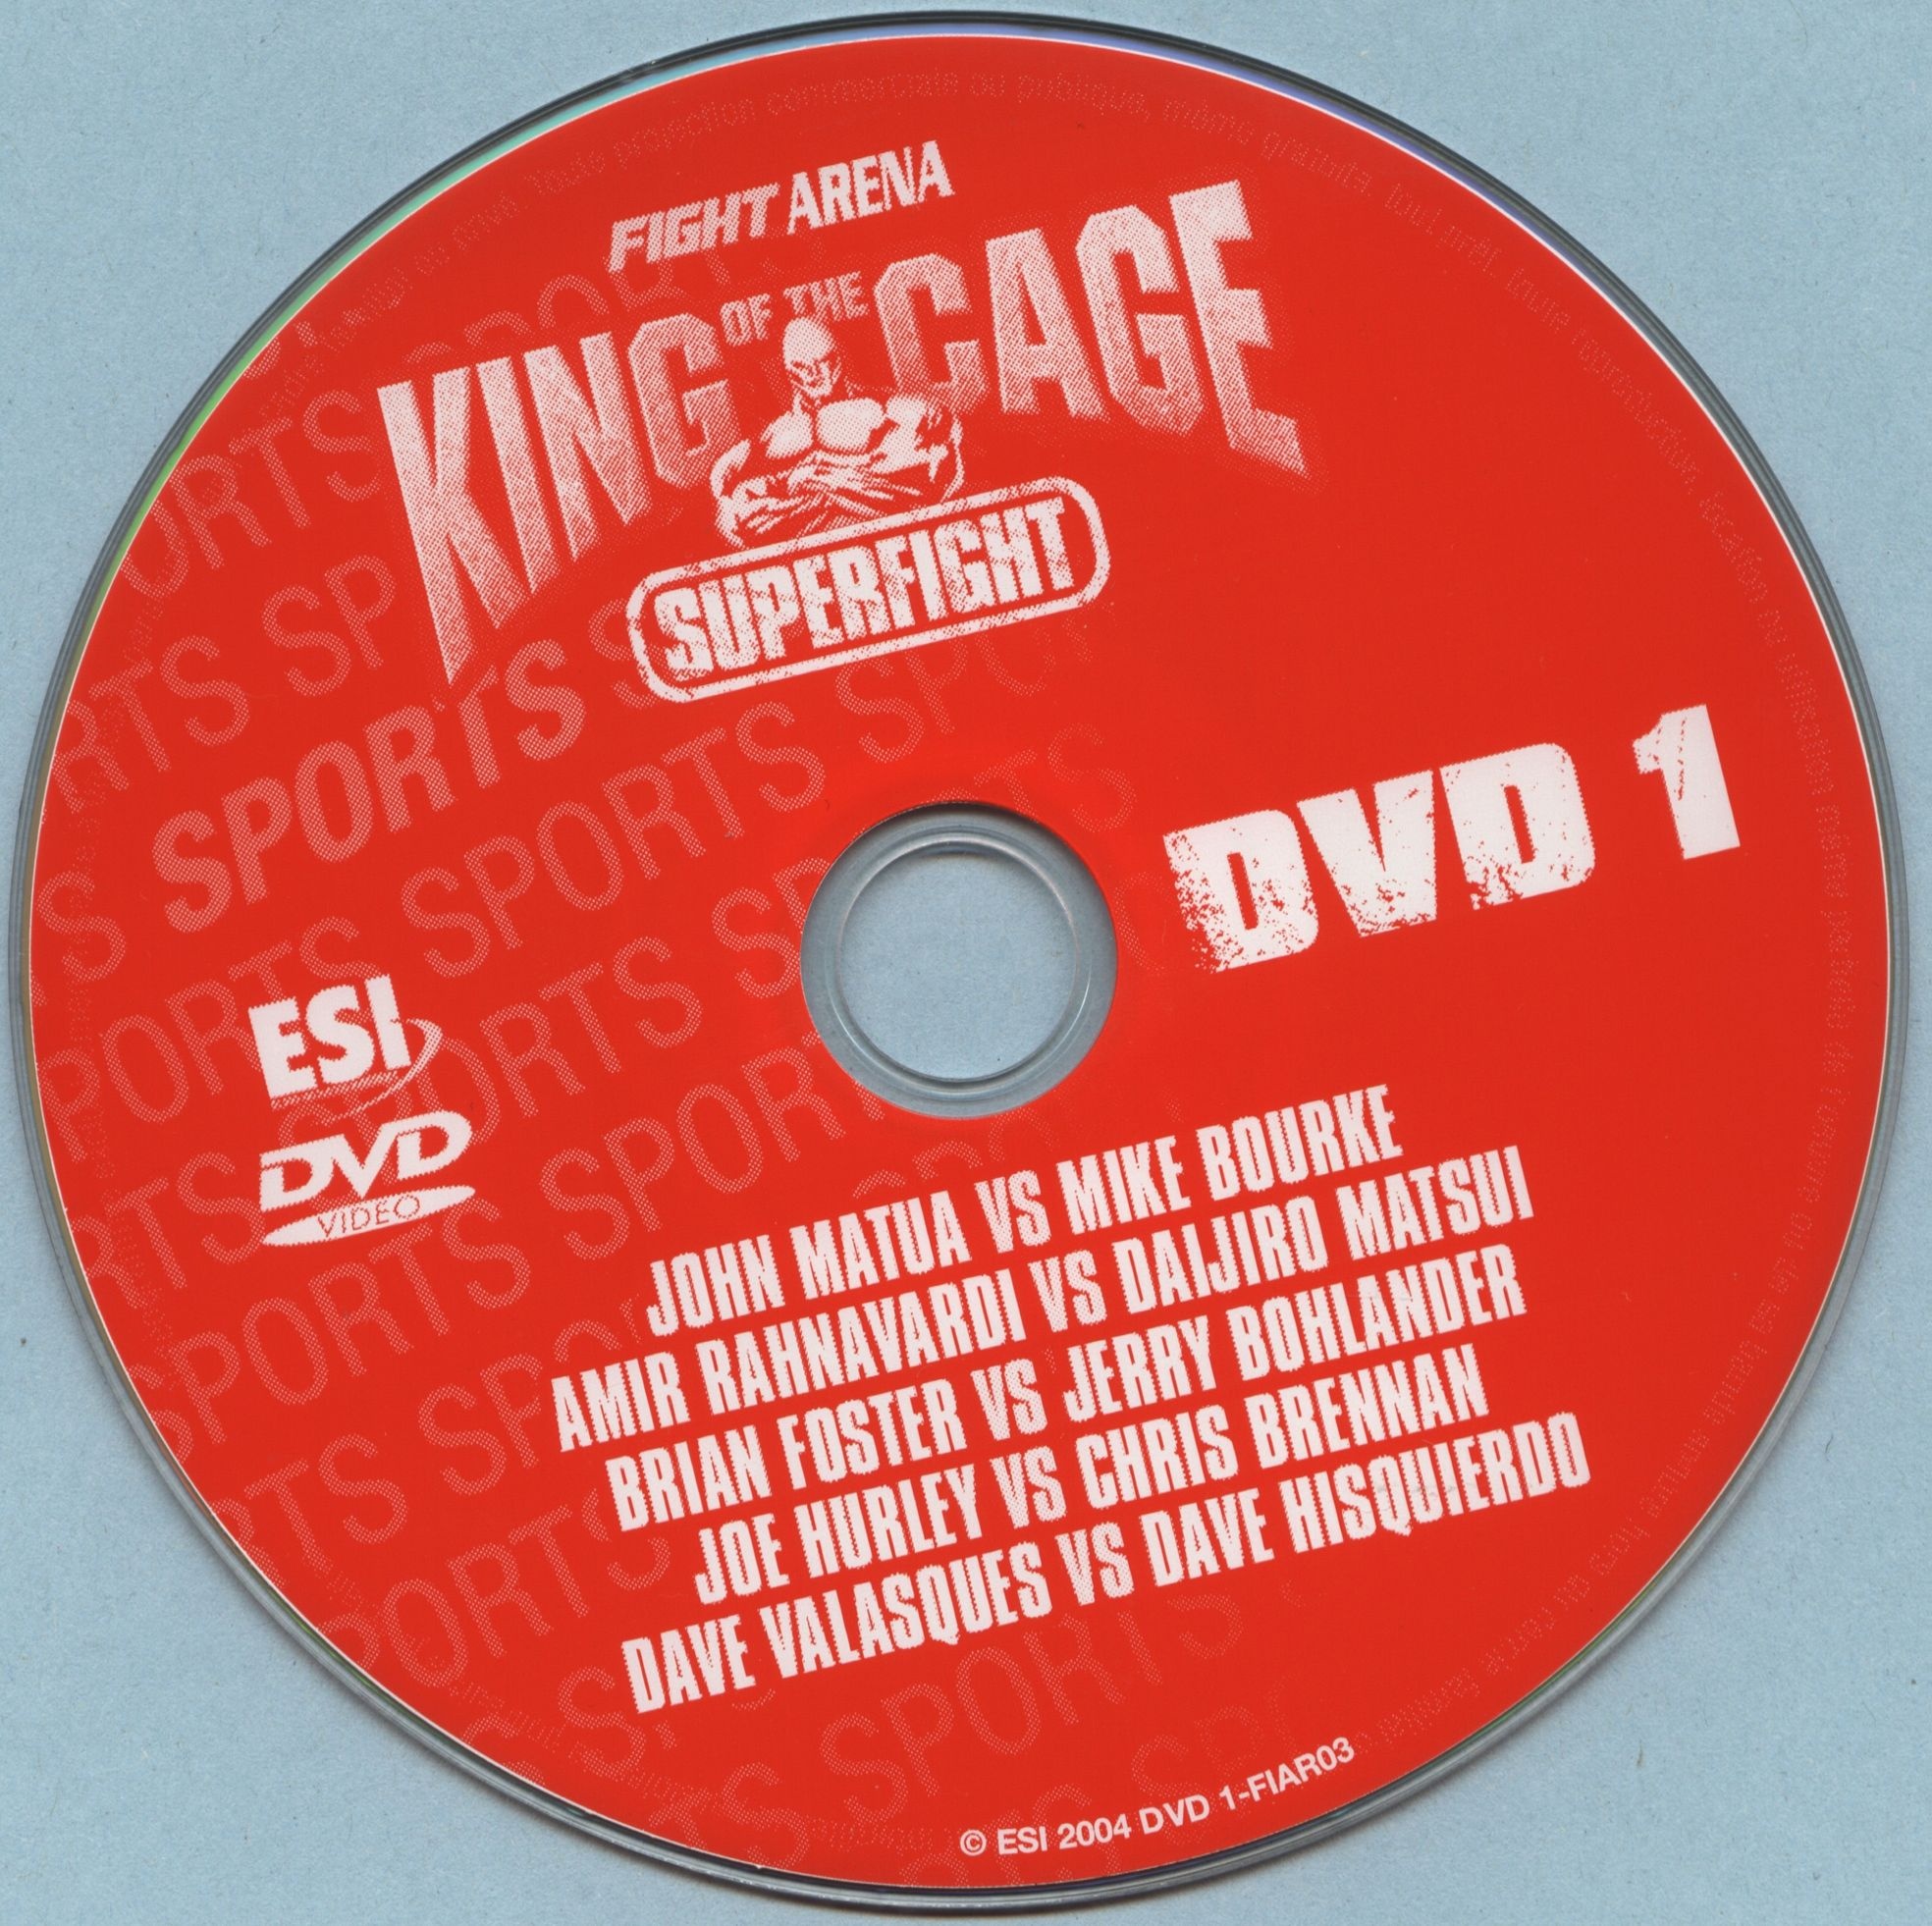 King of the cage superfight DVD 1